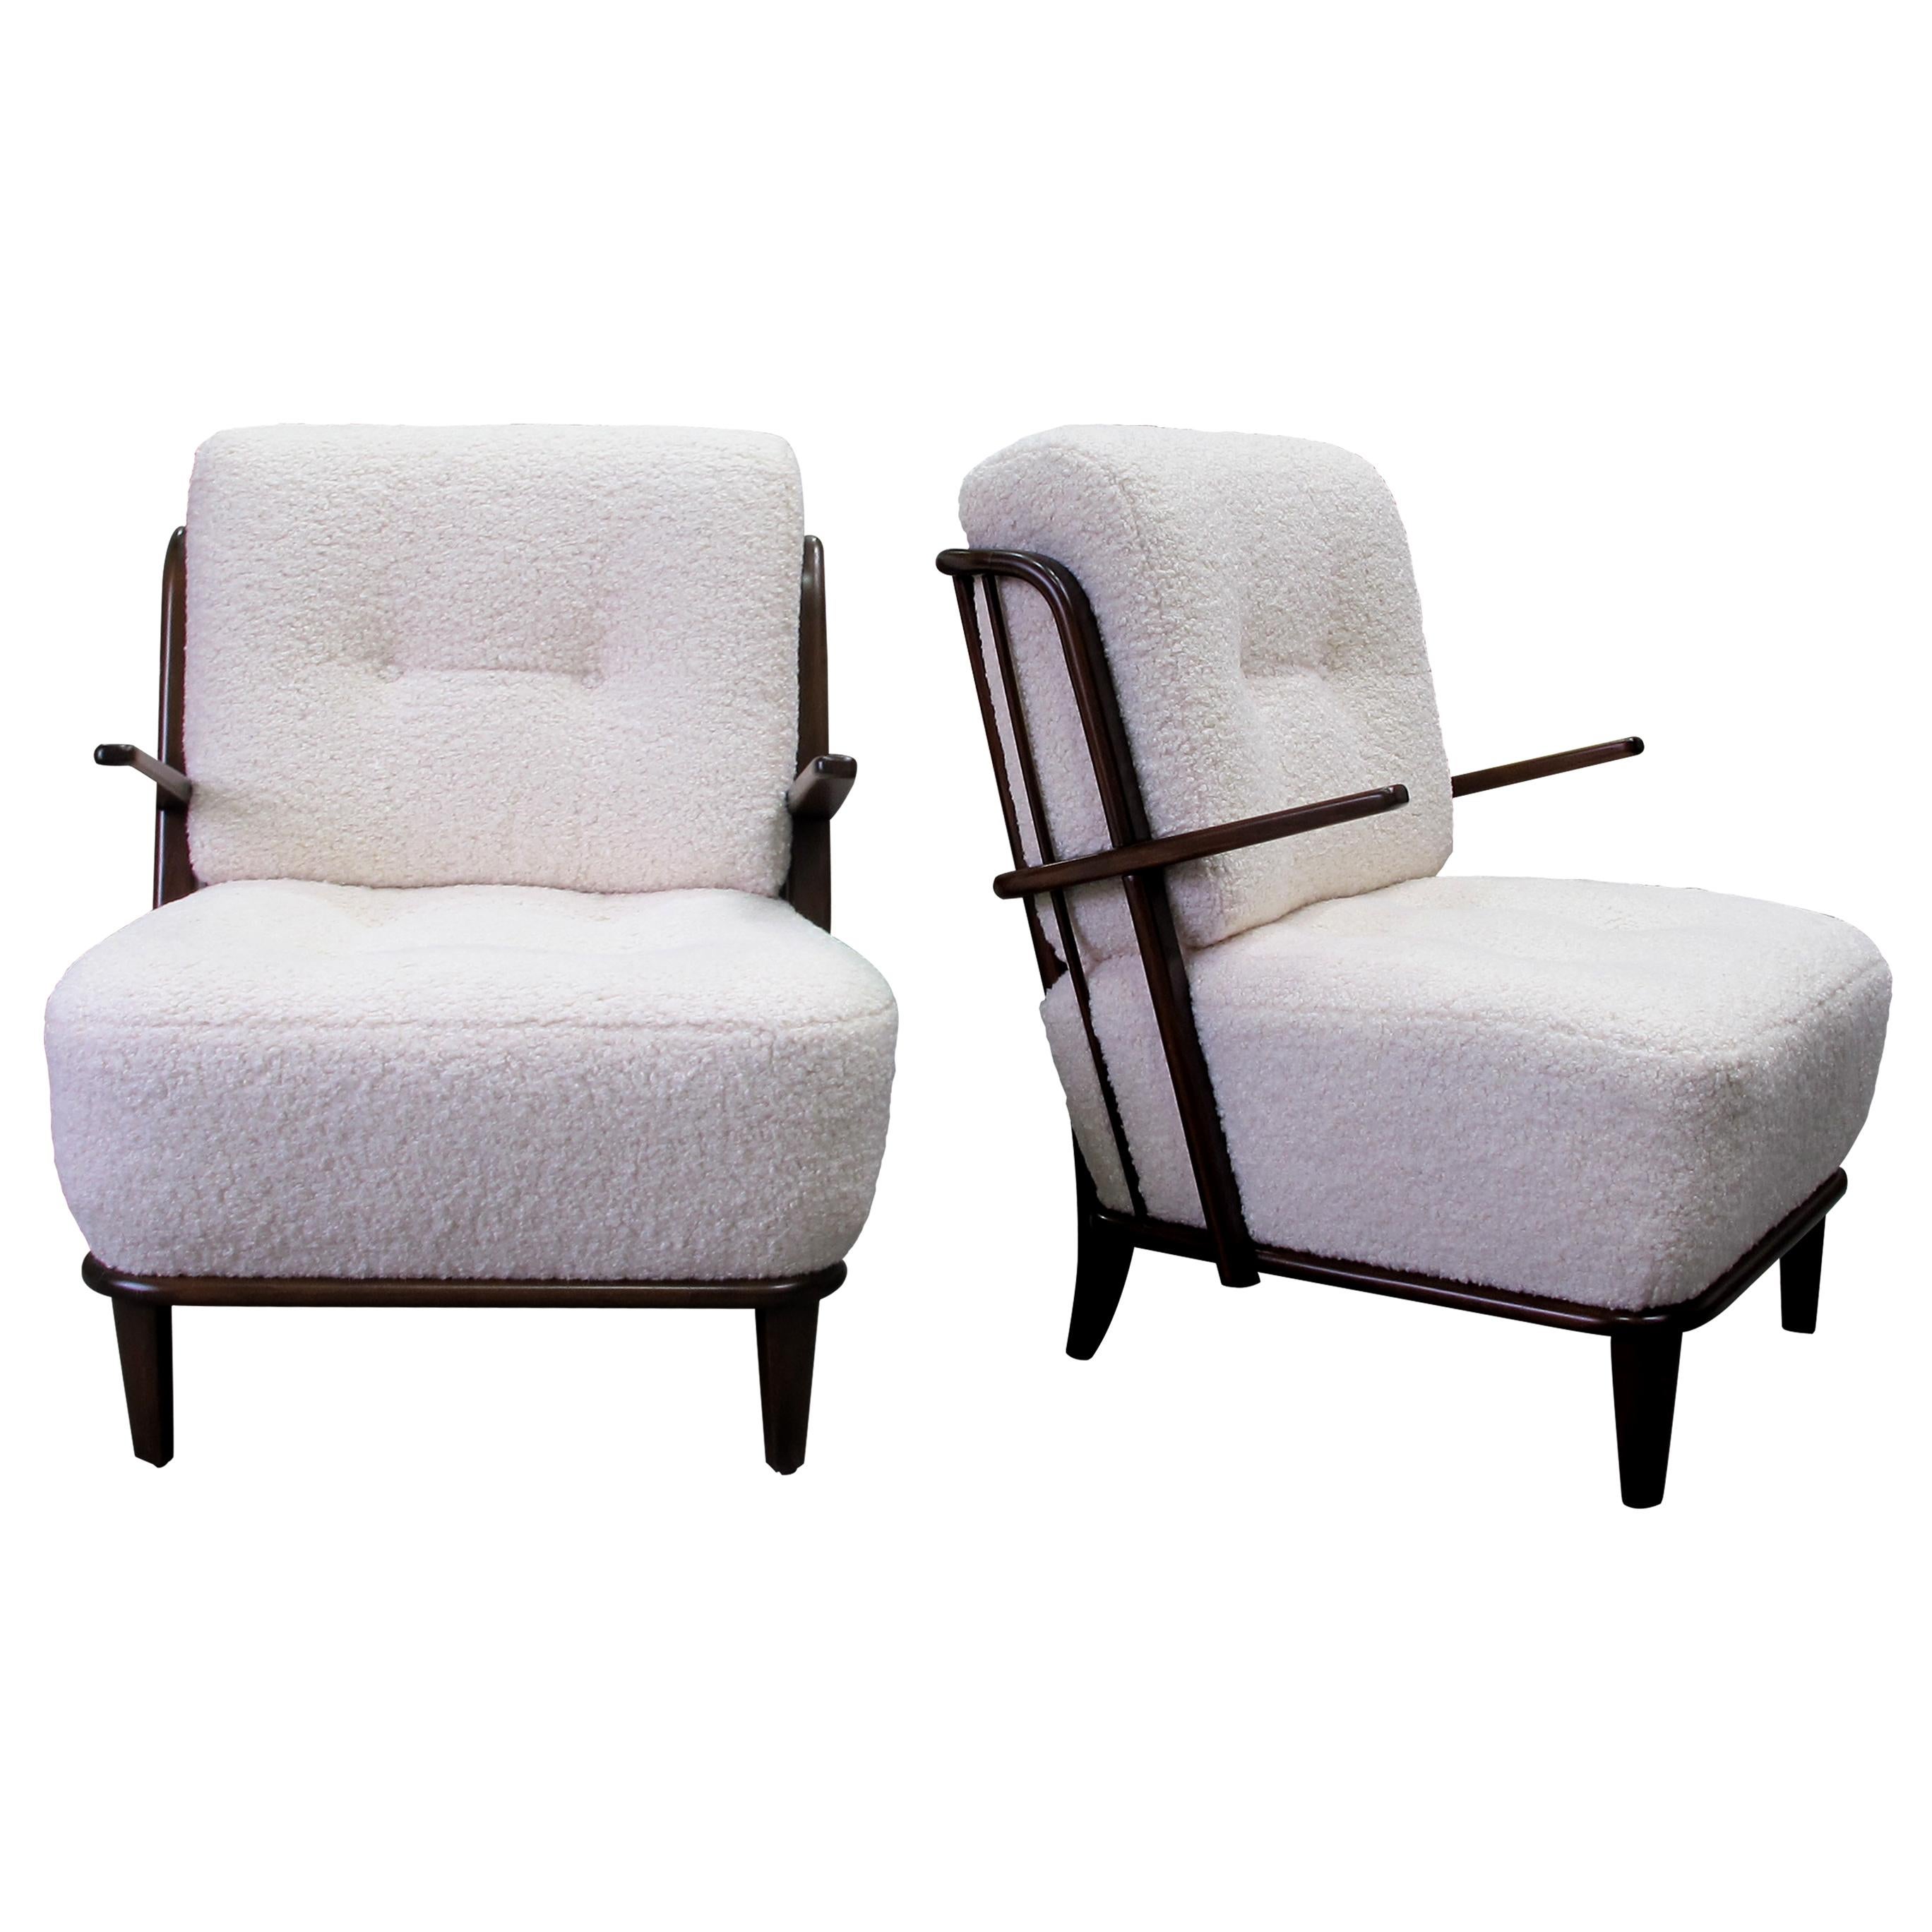 This is a very elegant pair of oak frame armchairs, made in Germany in the 1940s, newly upholstered in a soft boucle fabric.  The defining feature of these armchairs is the meticulously designed backrest with round bars that add a touch of